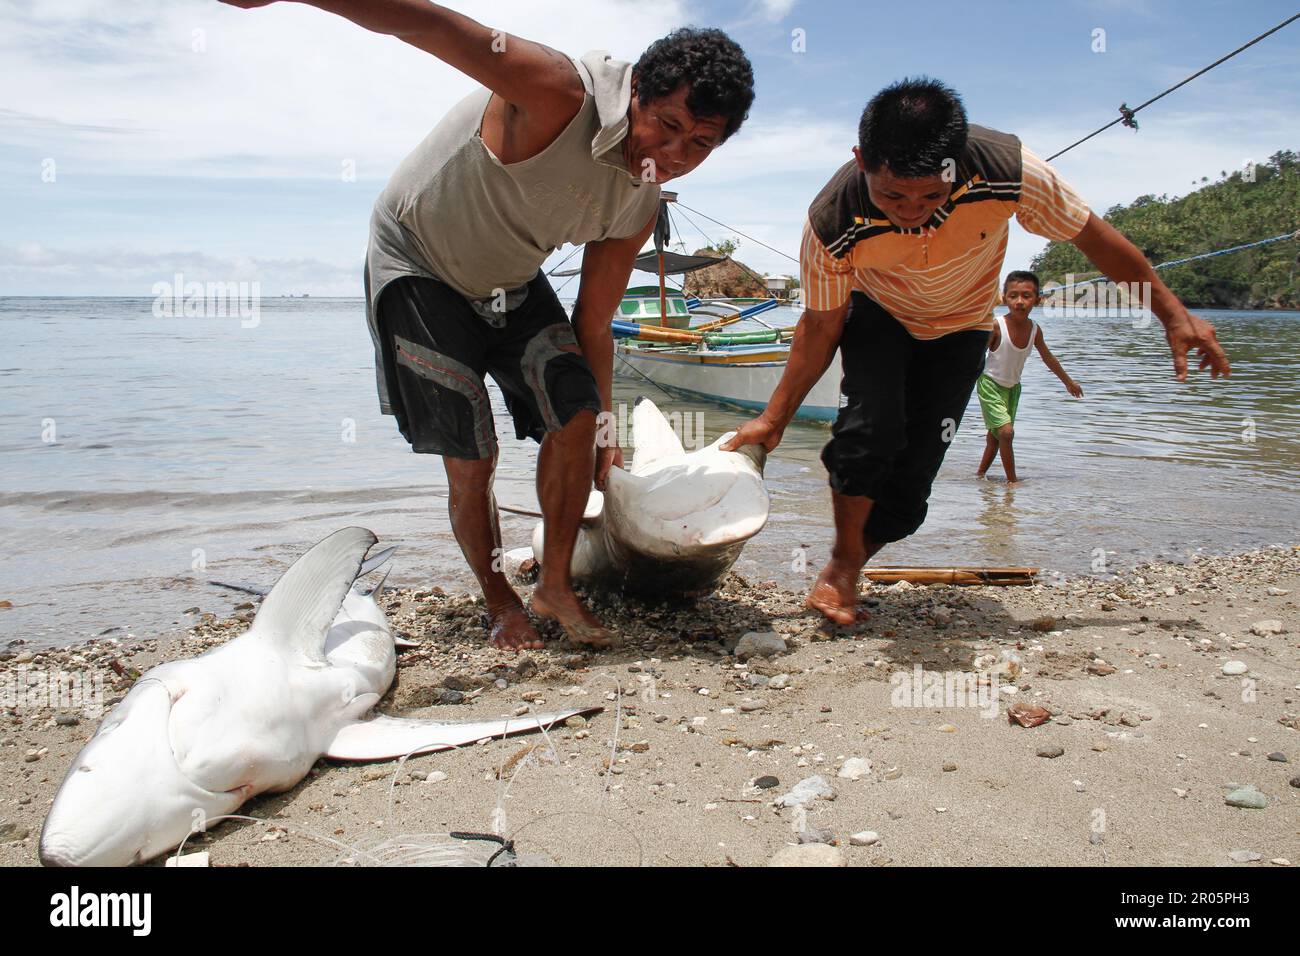 Fishermen on Batuwingkung Island, North Sulawesi, Indonesia are slicing shark fins and shark meat that they have just caught. Stock Photo